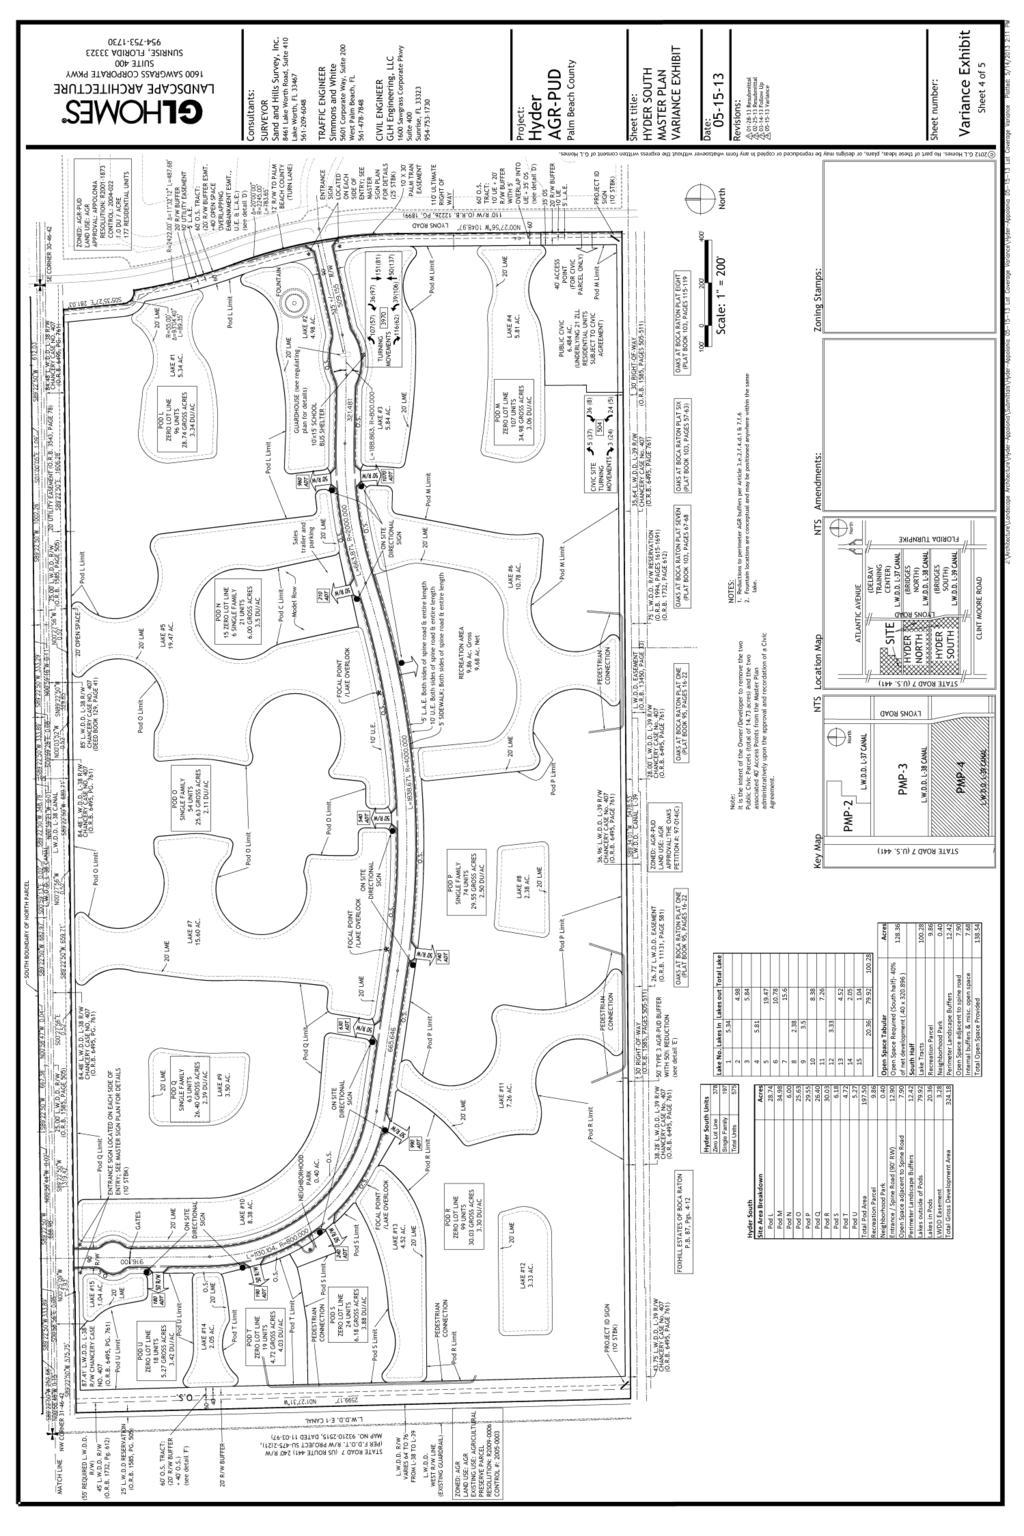 Figure 5 Preliminary Master Plan dated